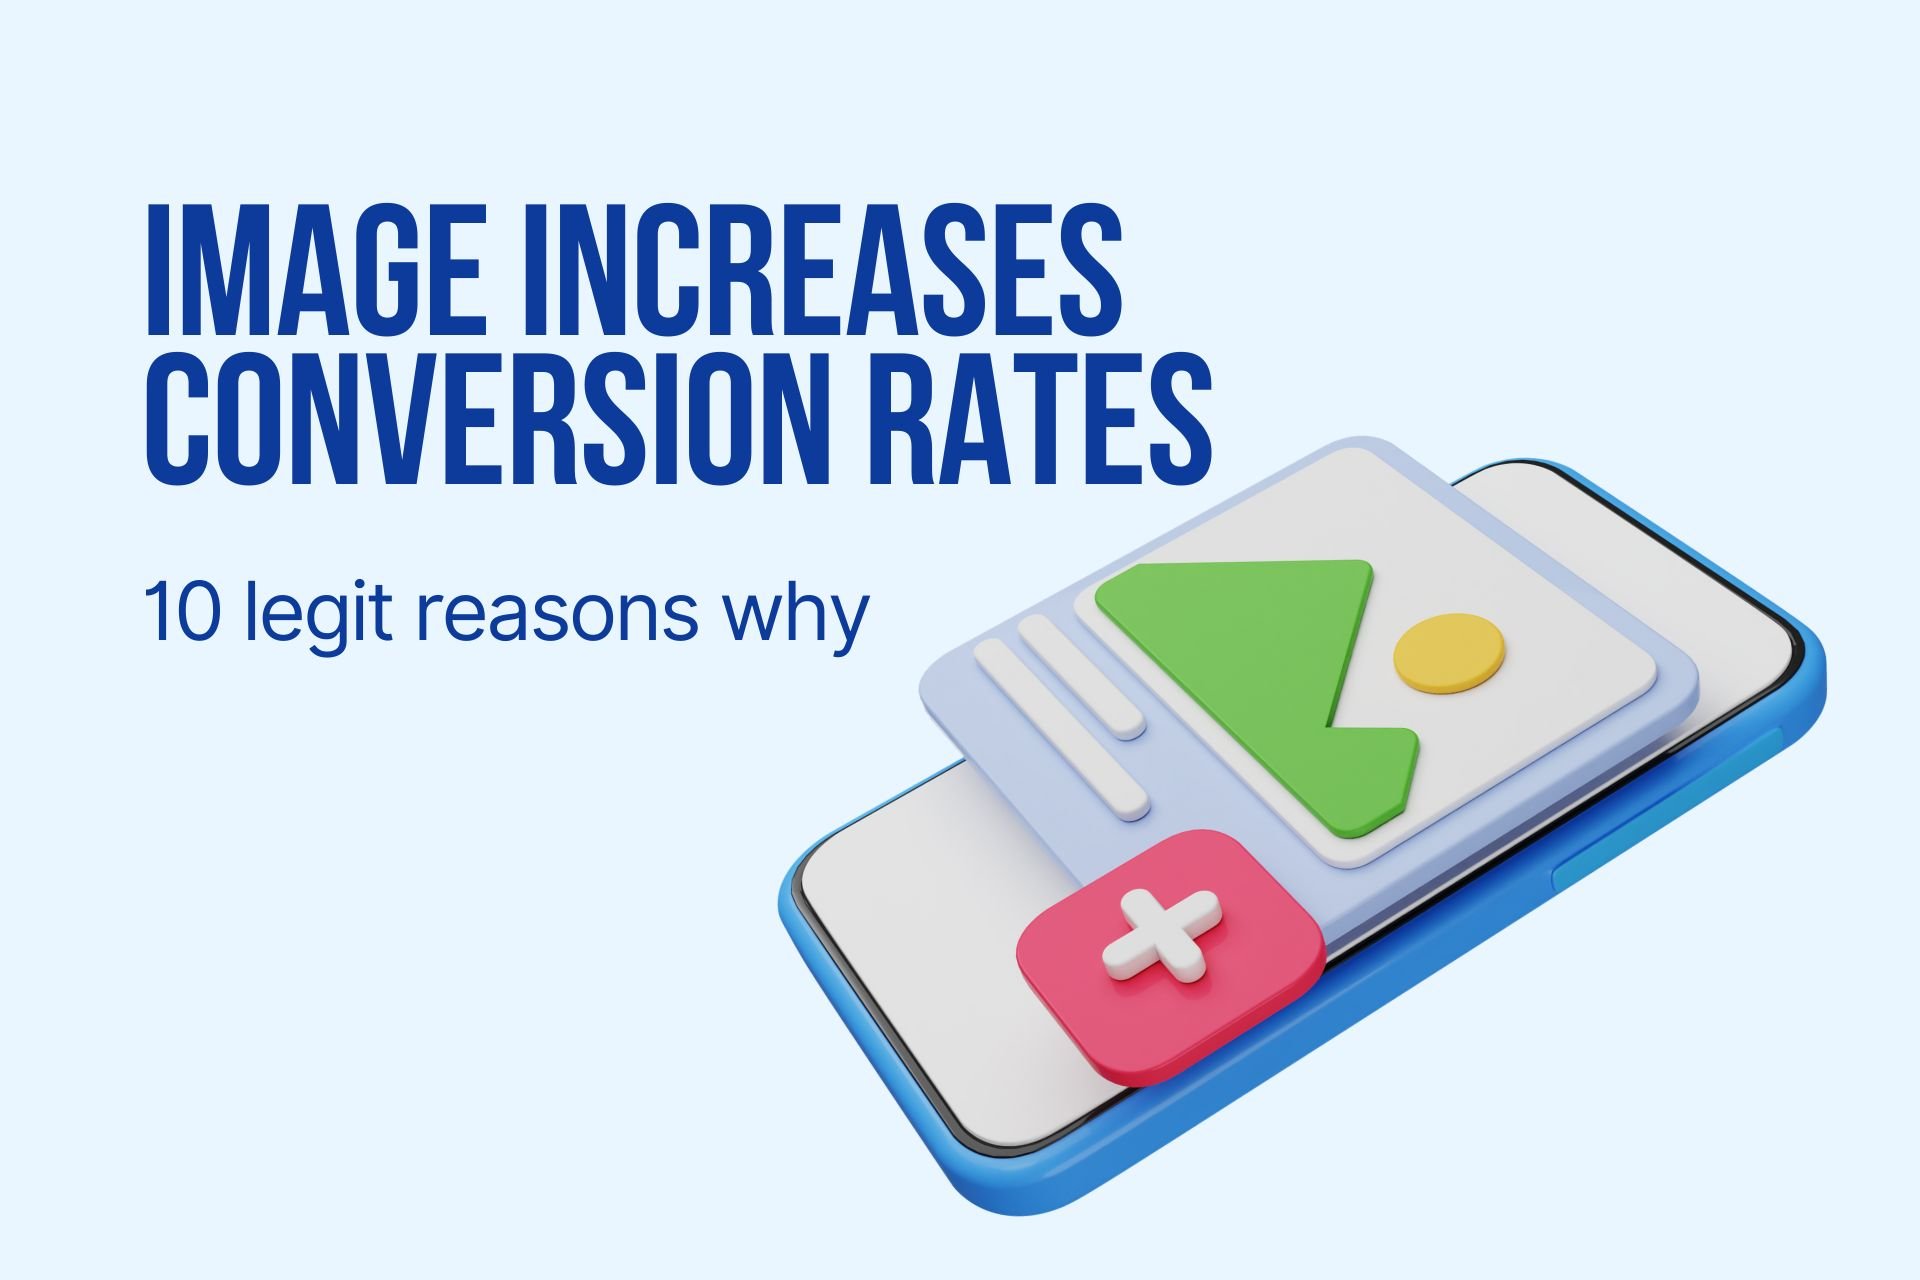 4 browser page on a laptop images improve your conversion rate why images improve conversions